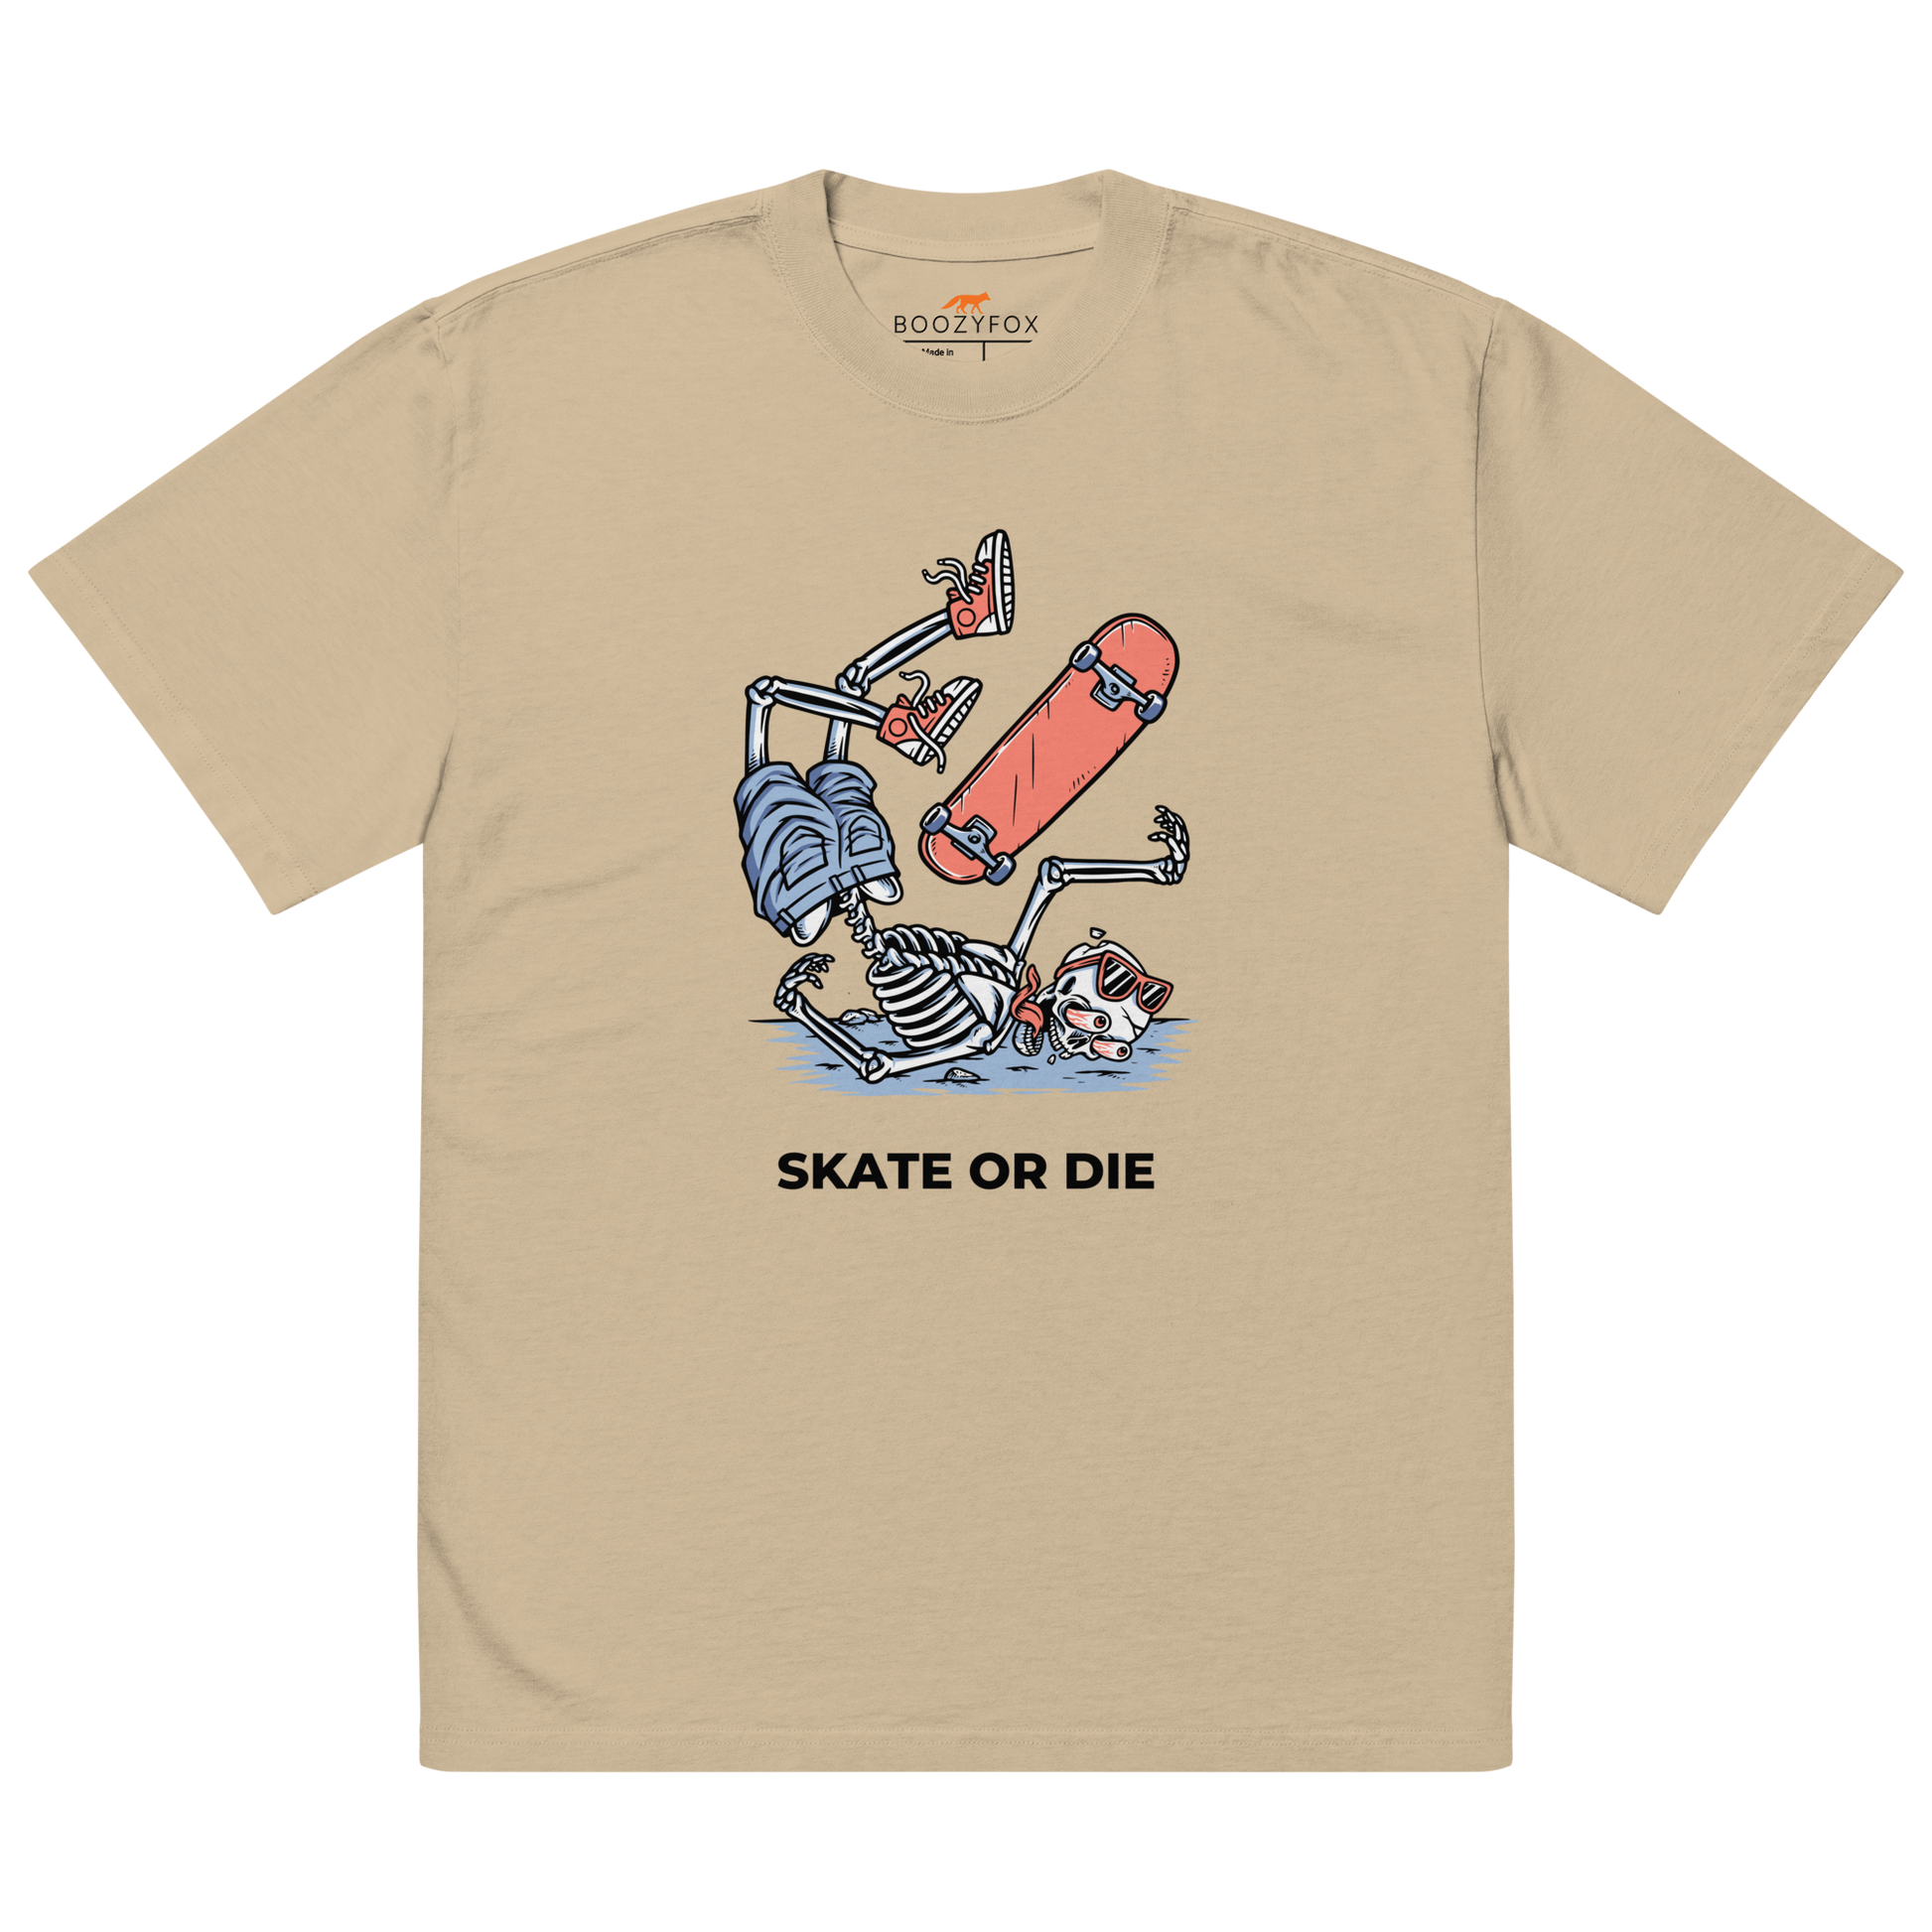 Faded Khaki Skate or Die Oversized T-Shirt featuring a fearless Skeleton Falling While Skateboarding graphic on the chest - Cool Graphic Skeleton Oversized Tees - Boozy Fox